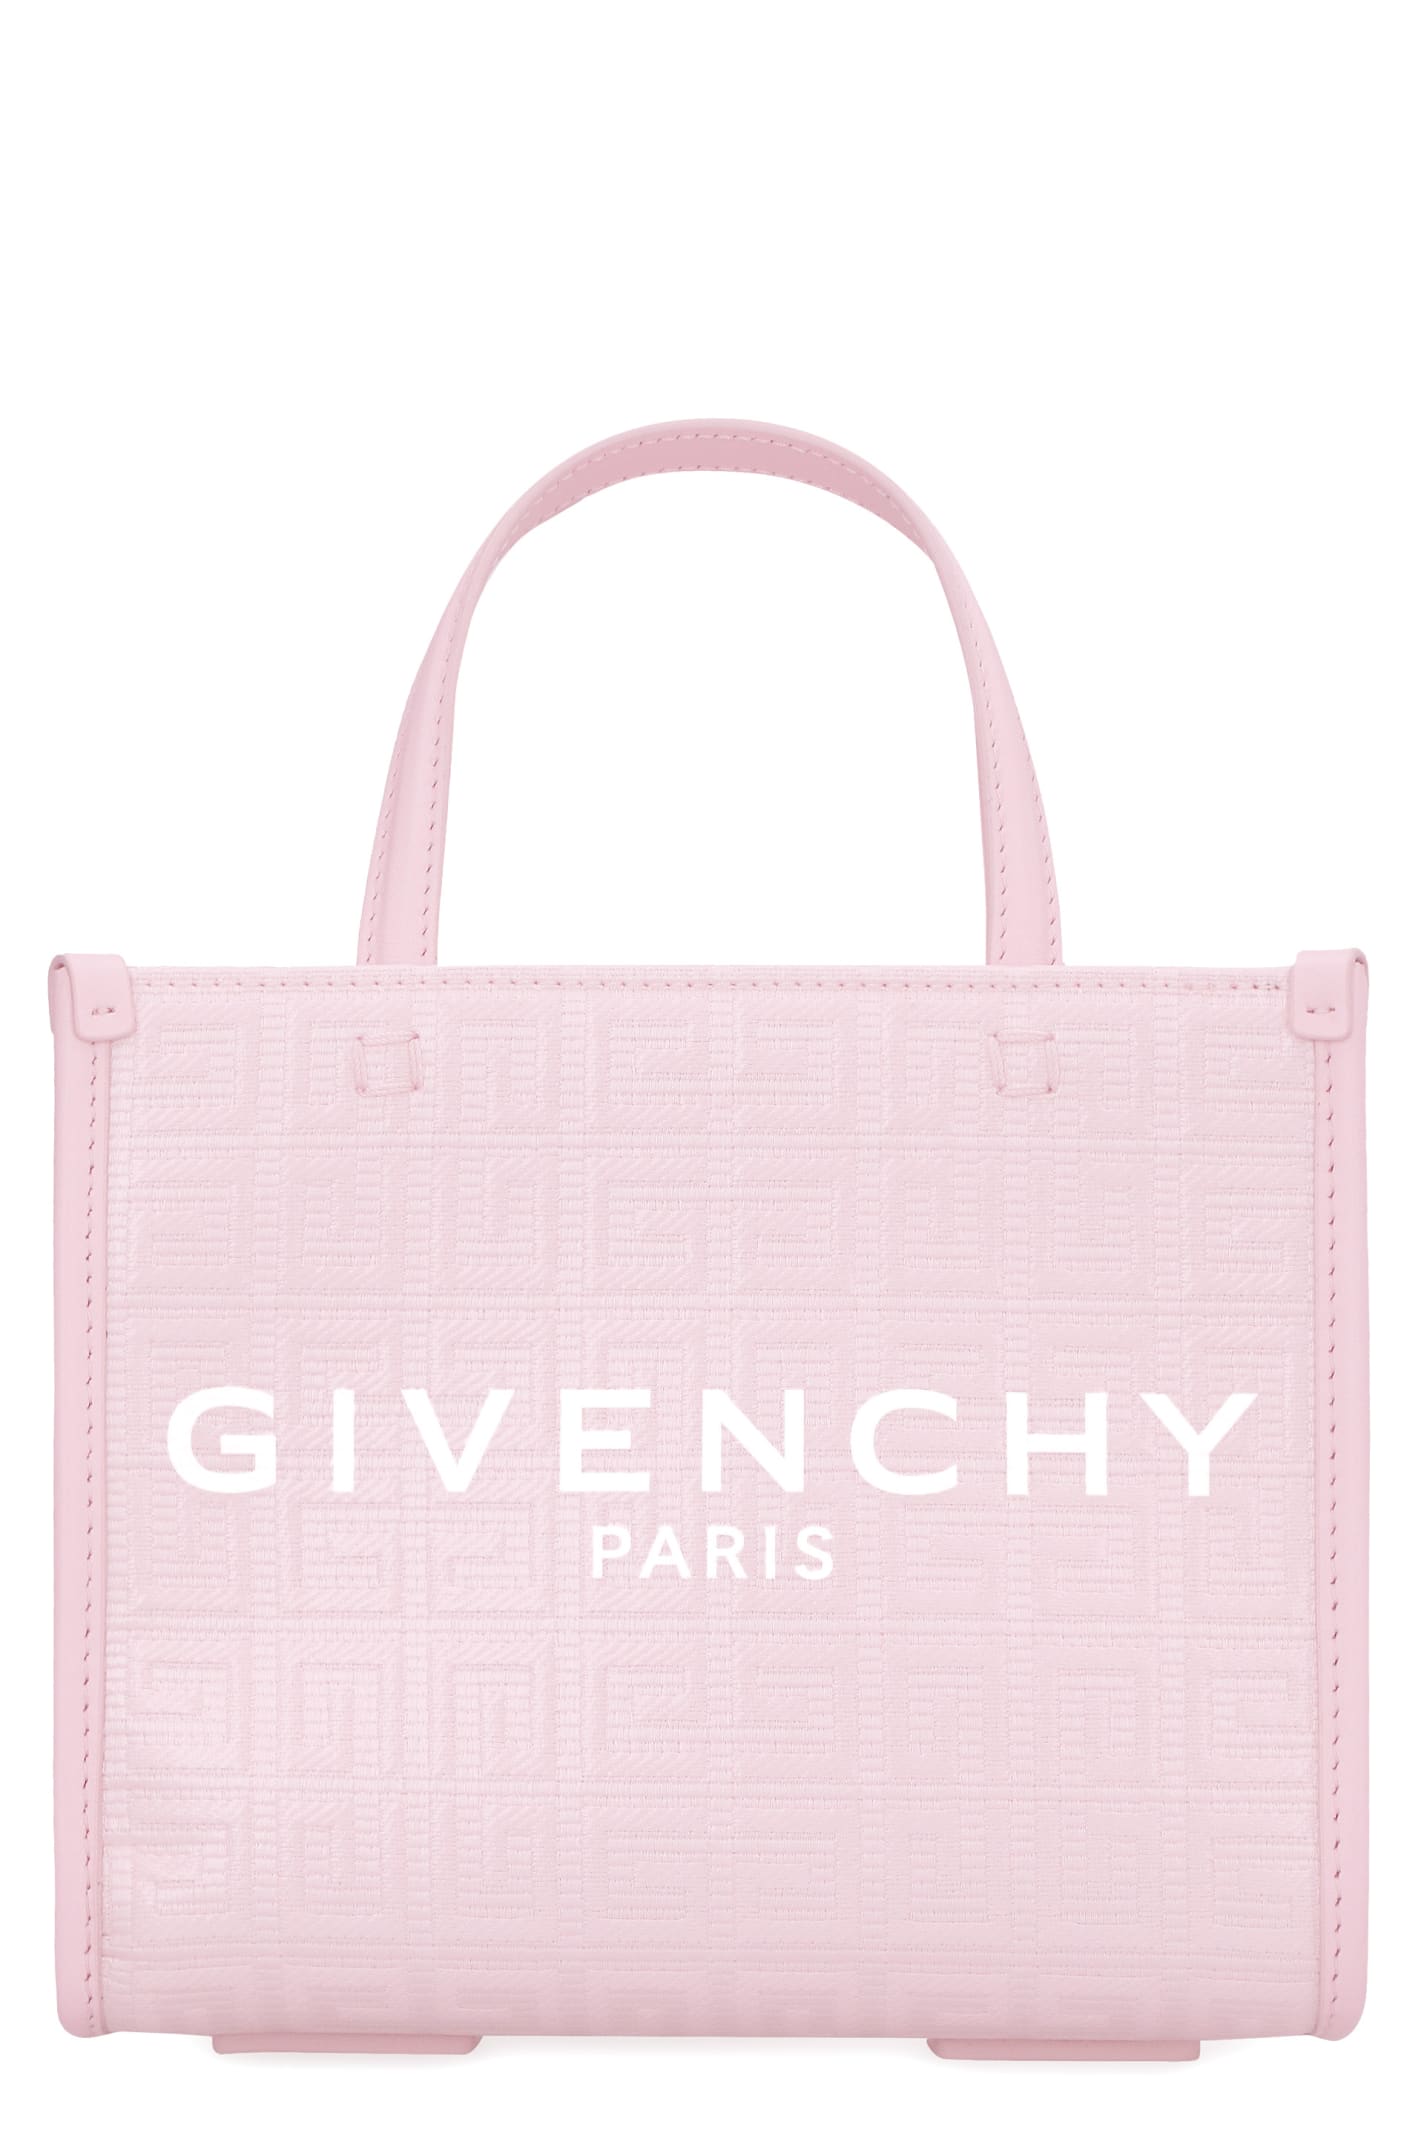 Givenchy G Canvas Mini Tote Bag In Pink | ModeSens